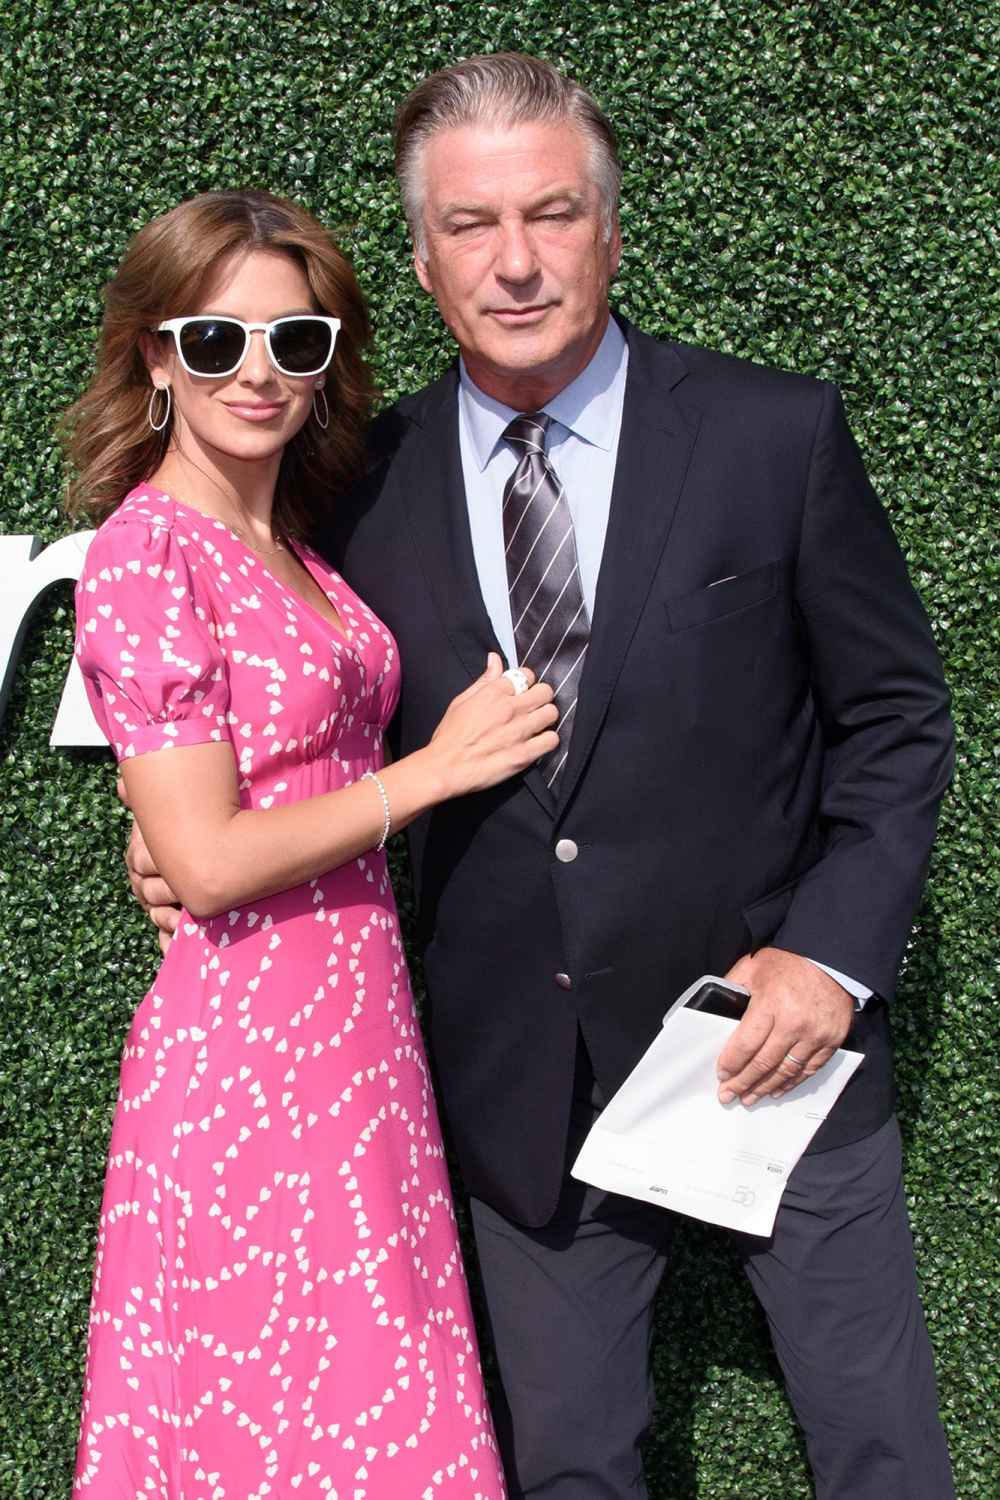 Alec Baldwin Didn’t Know Hailey and Justin Were Marrying Again Soon